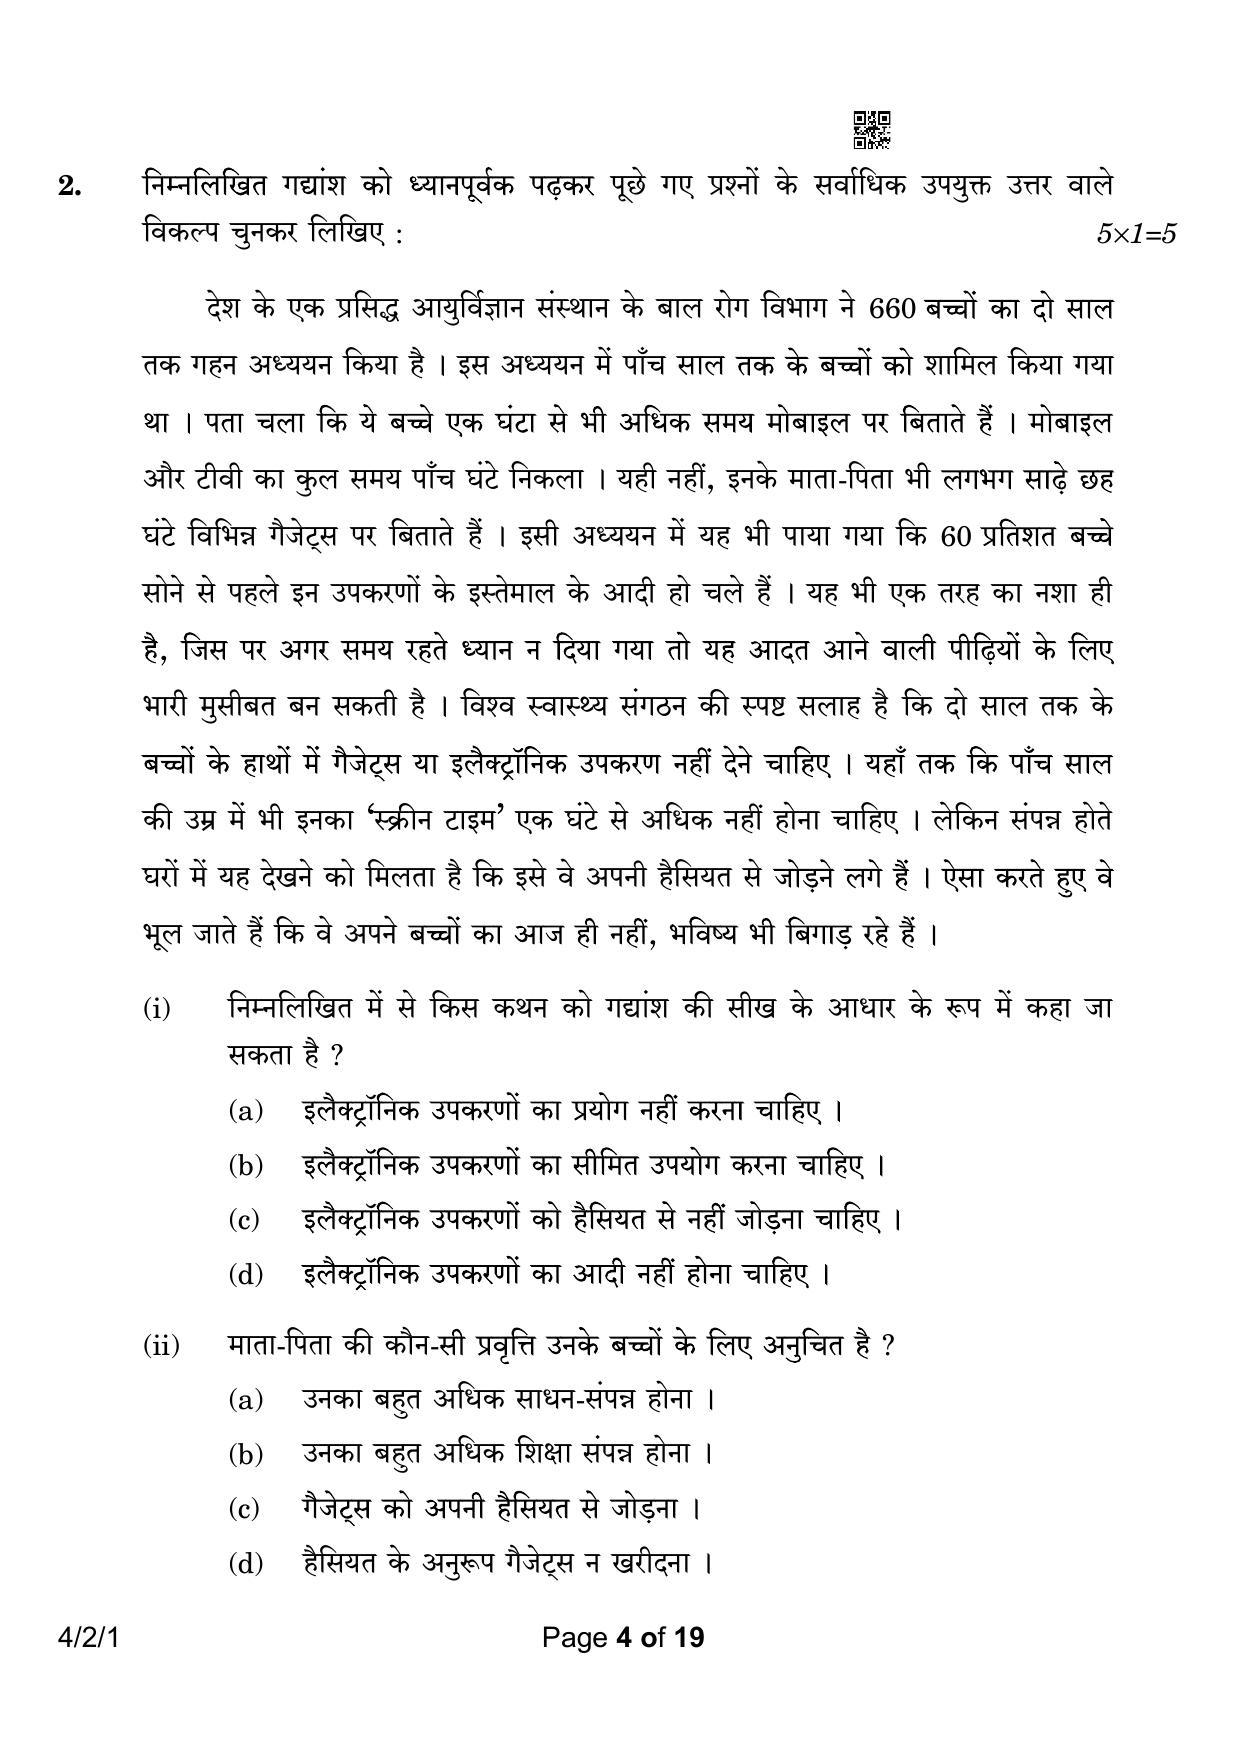 CBSE Class 10 4-2-1 Hindi B 2023 Question Paper - Page 4